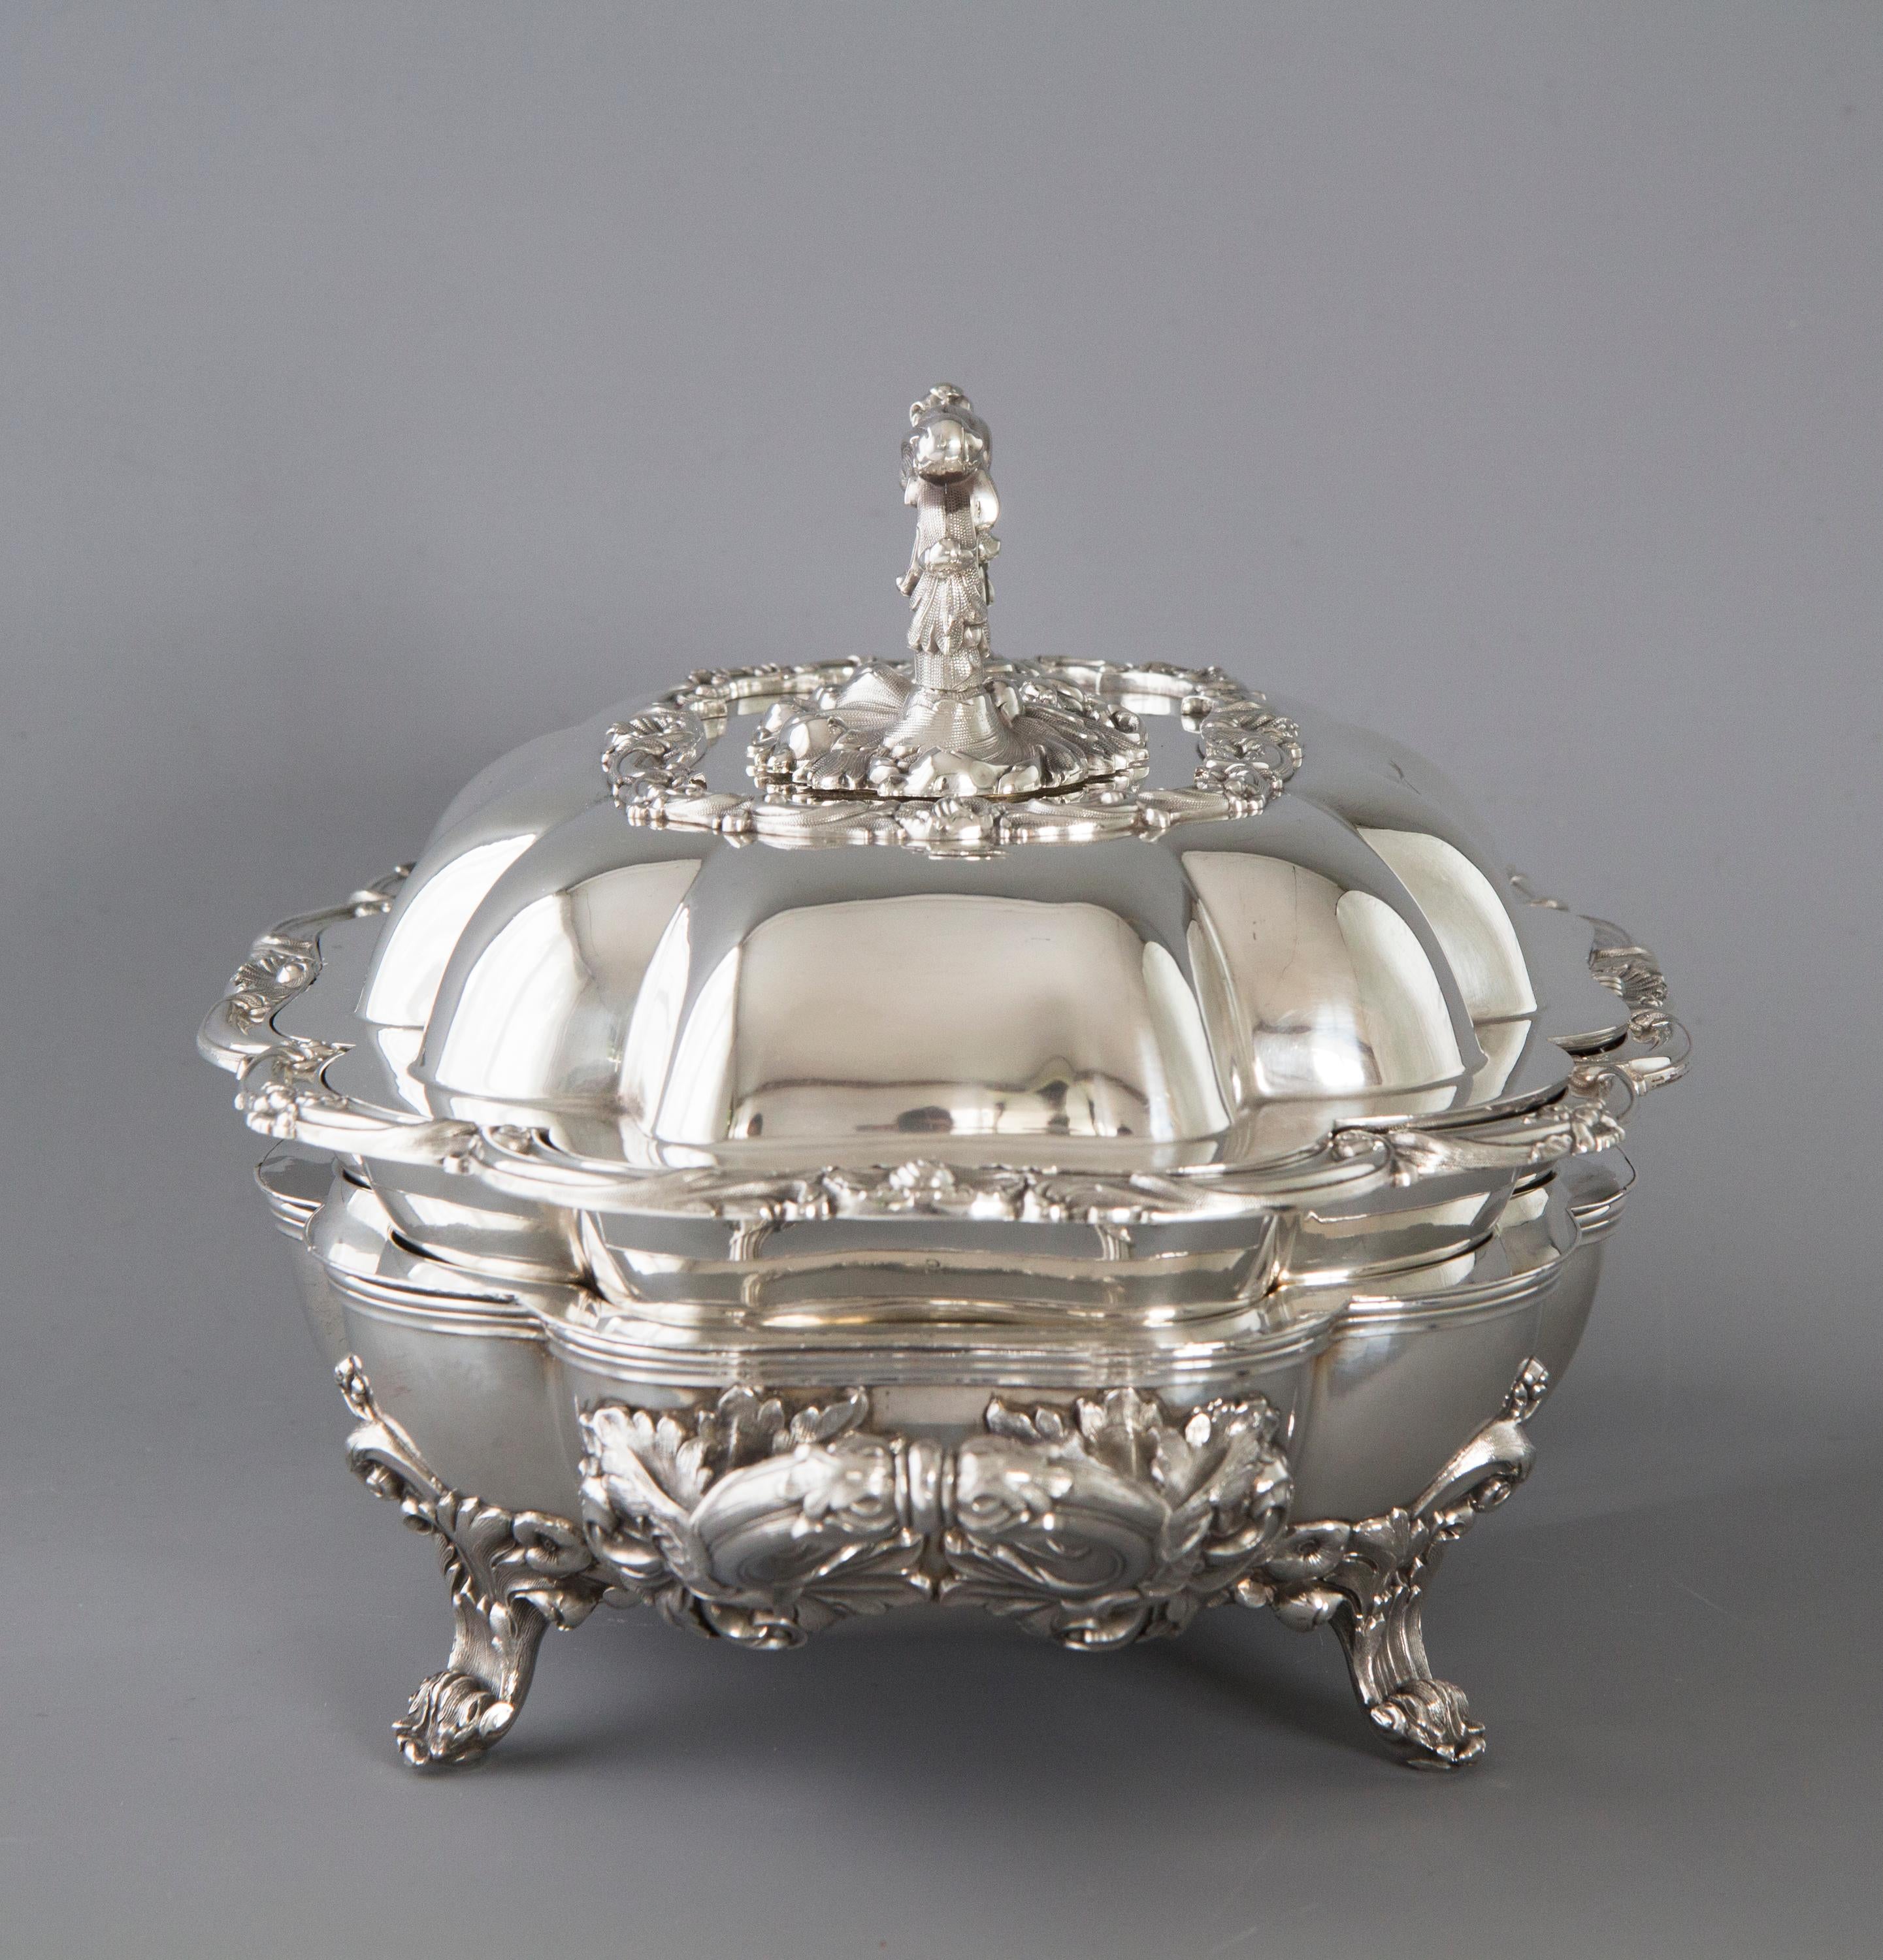 A very good quality William IV silver entree dish of shaped oval form. Embellished to the borders and lid with cast silver flower, leaf and fruit decoration. The twist off handle cast with similar motifs. The warming section of silver plate and an